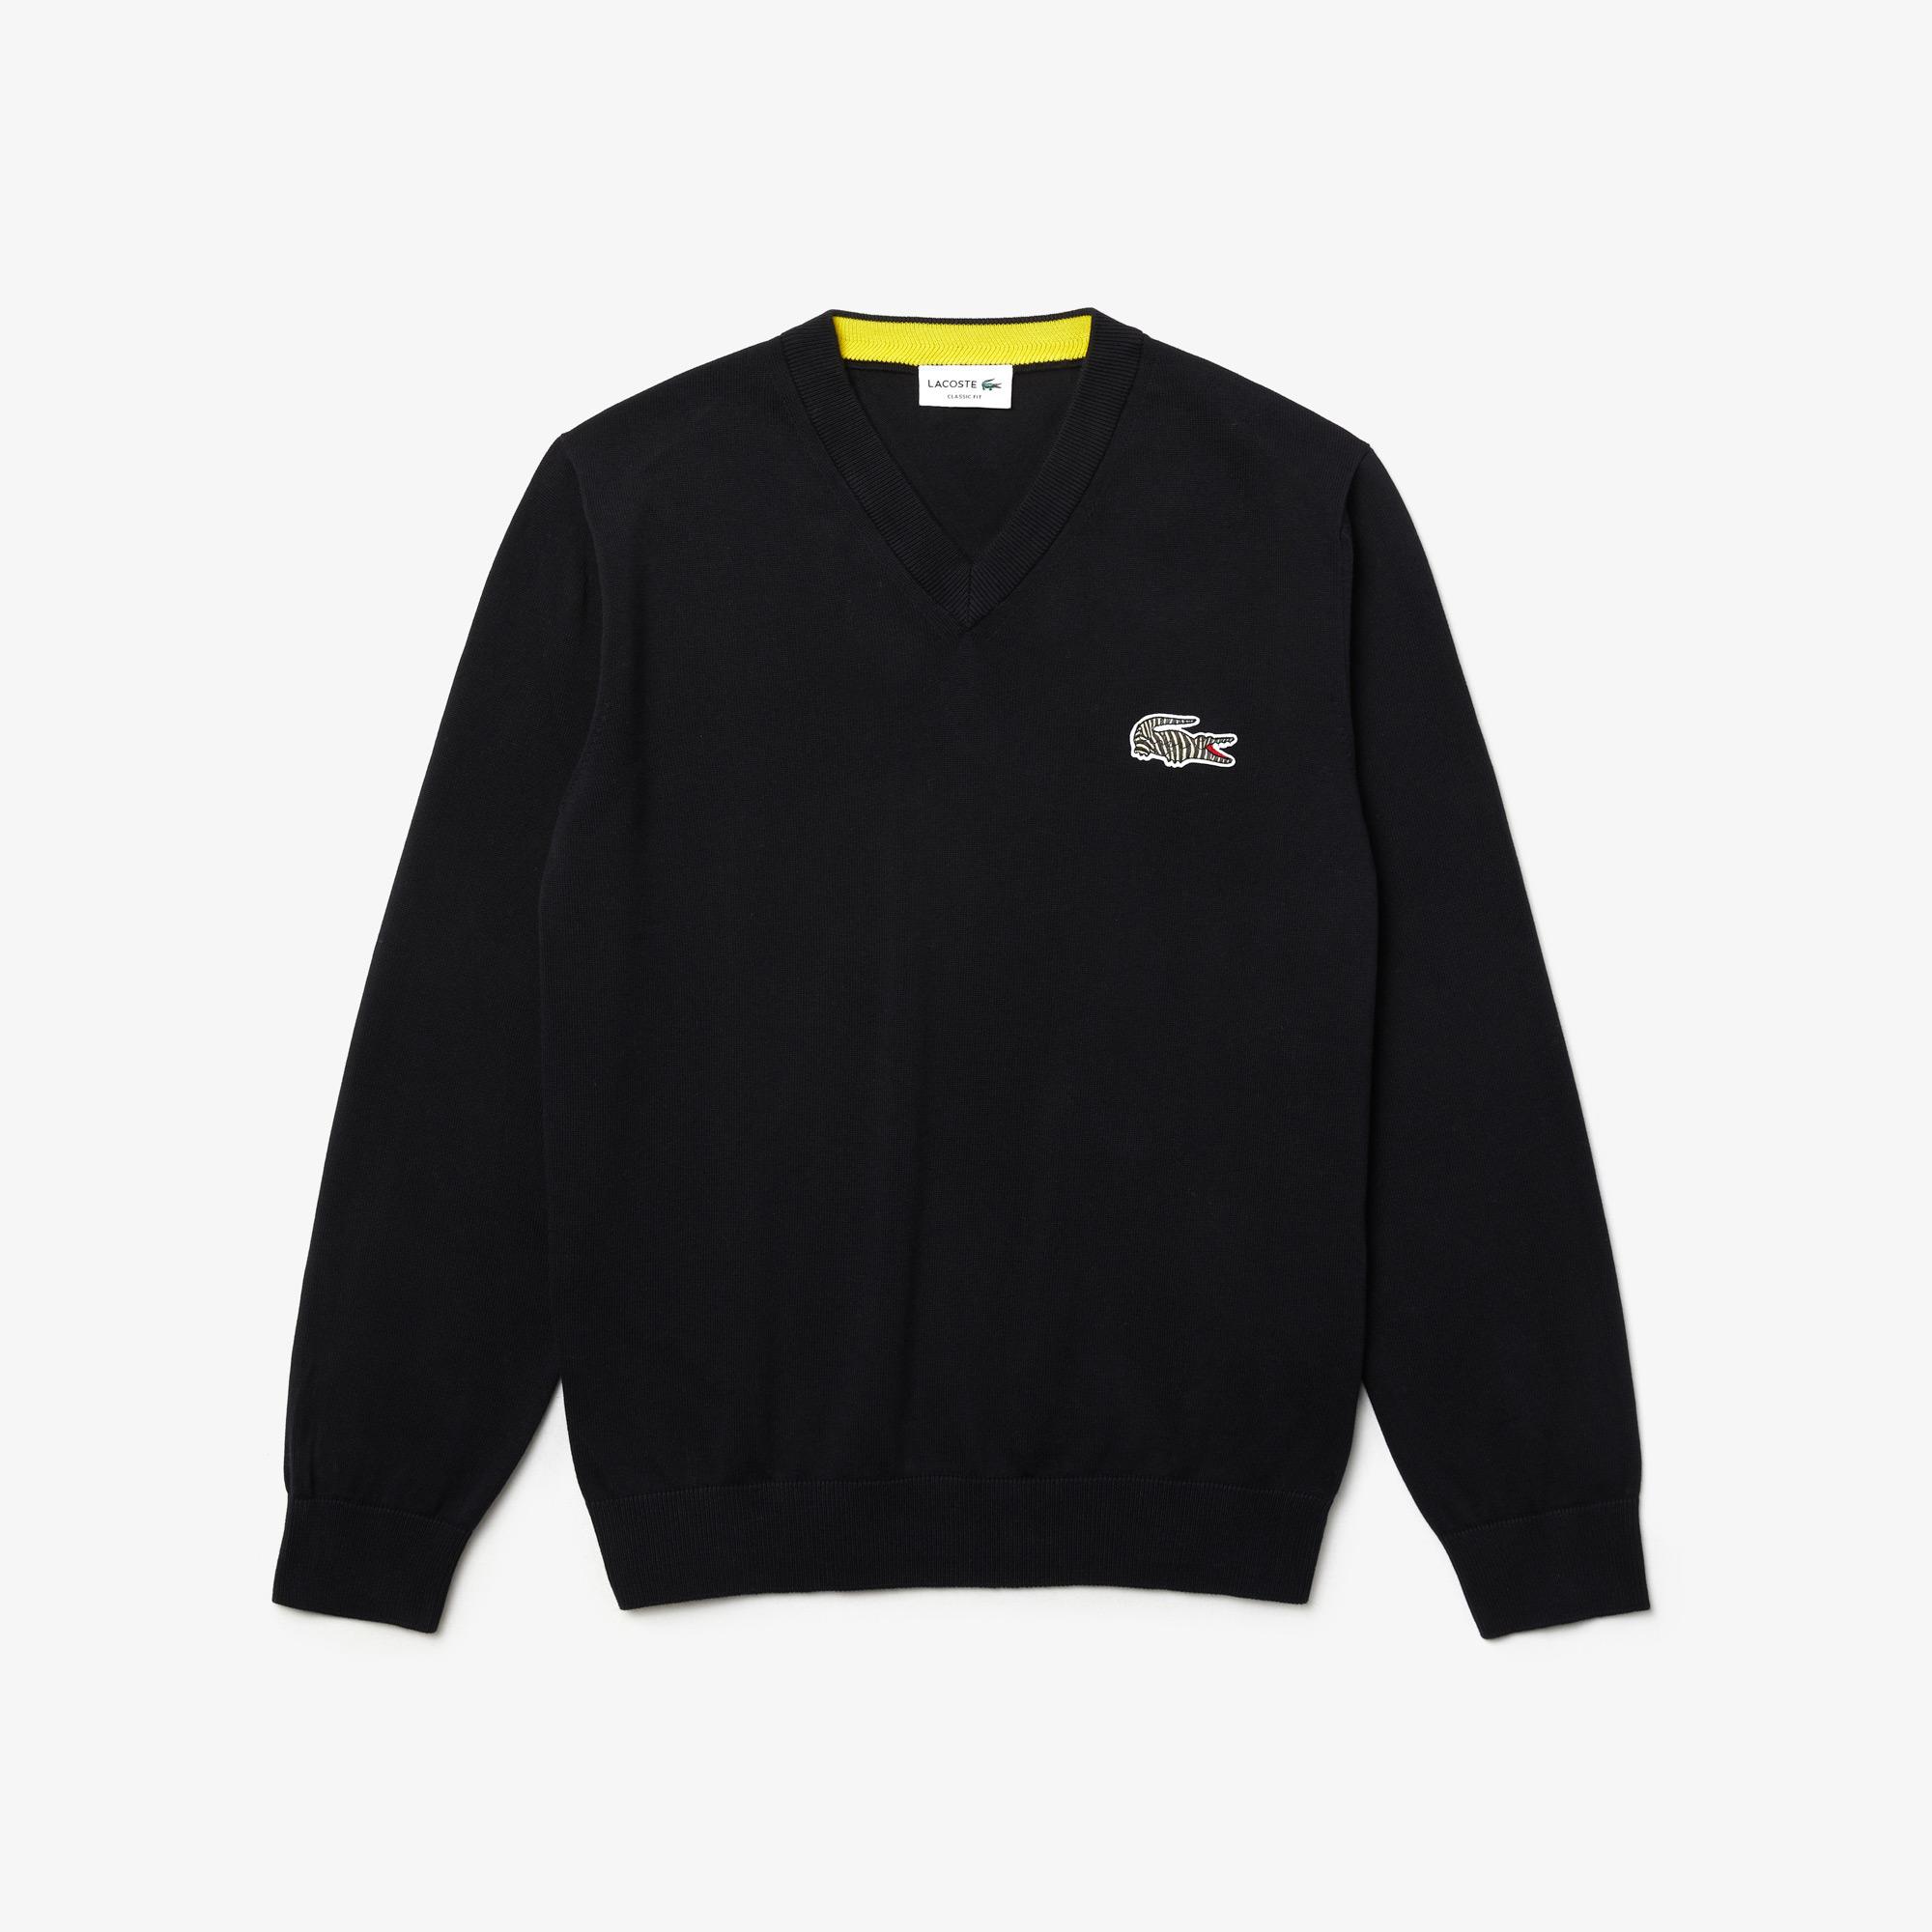 Lacoste x National Geographic Men’s V-neck Cotton Sweater